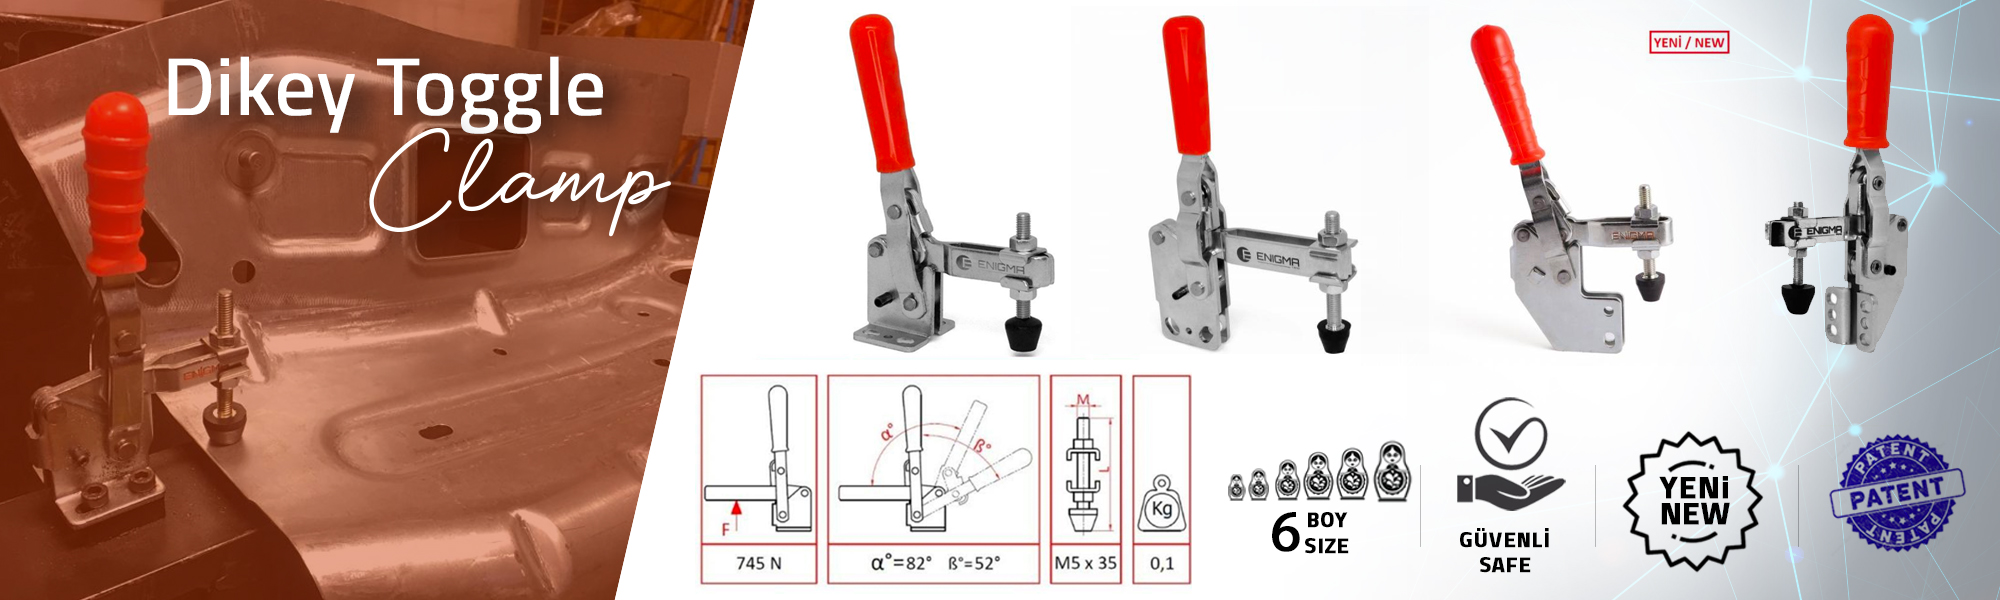 Dikey Toggle Clamps